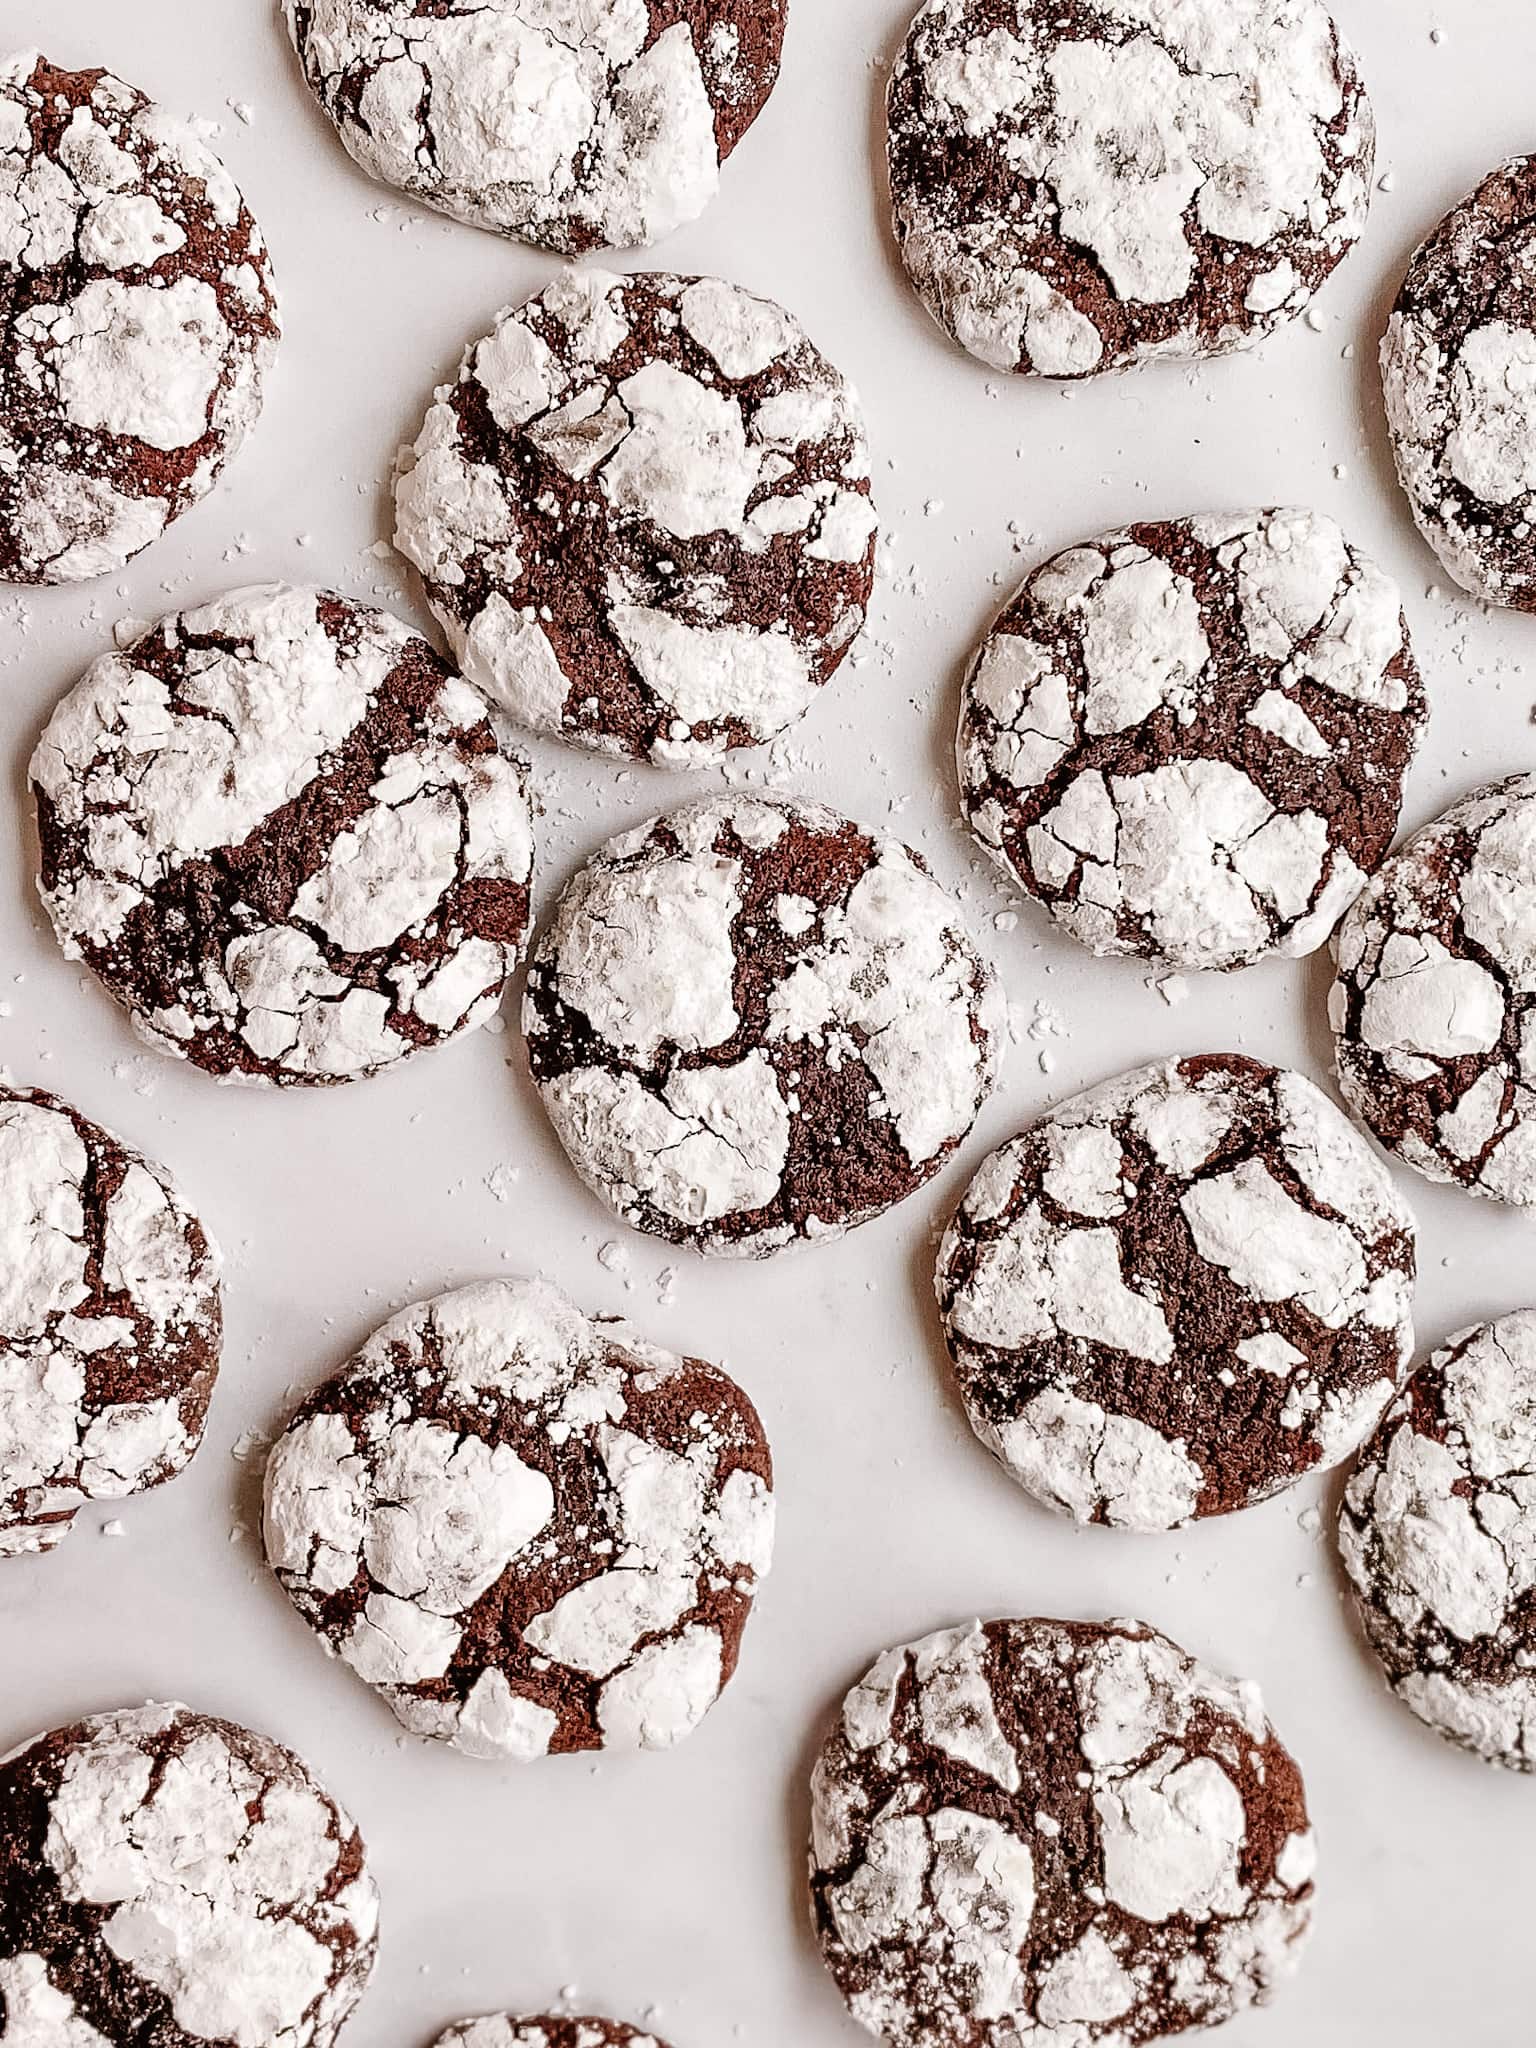 A spread of chocolate crinkle cookies spread out to show many cookies.